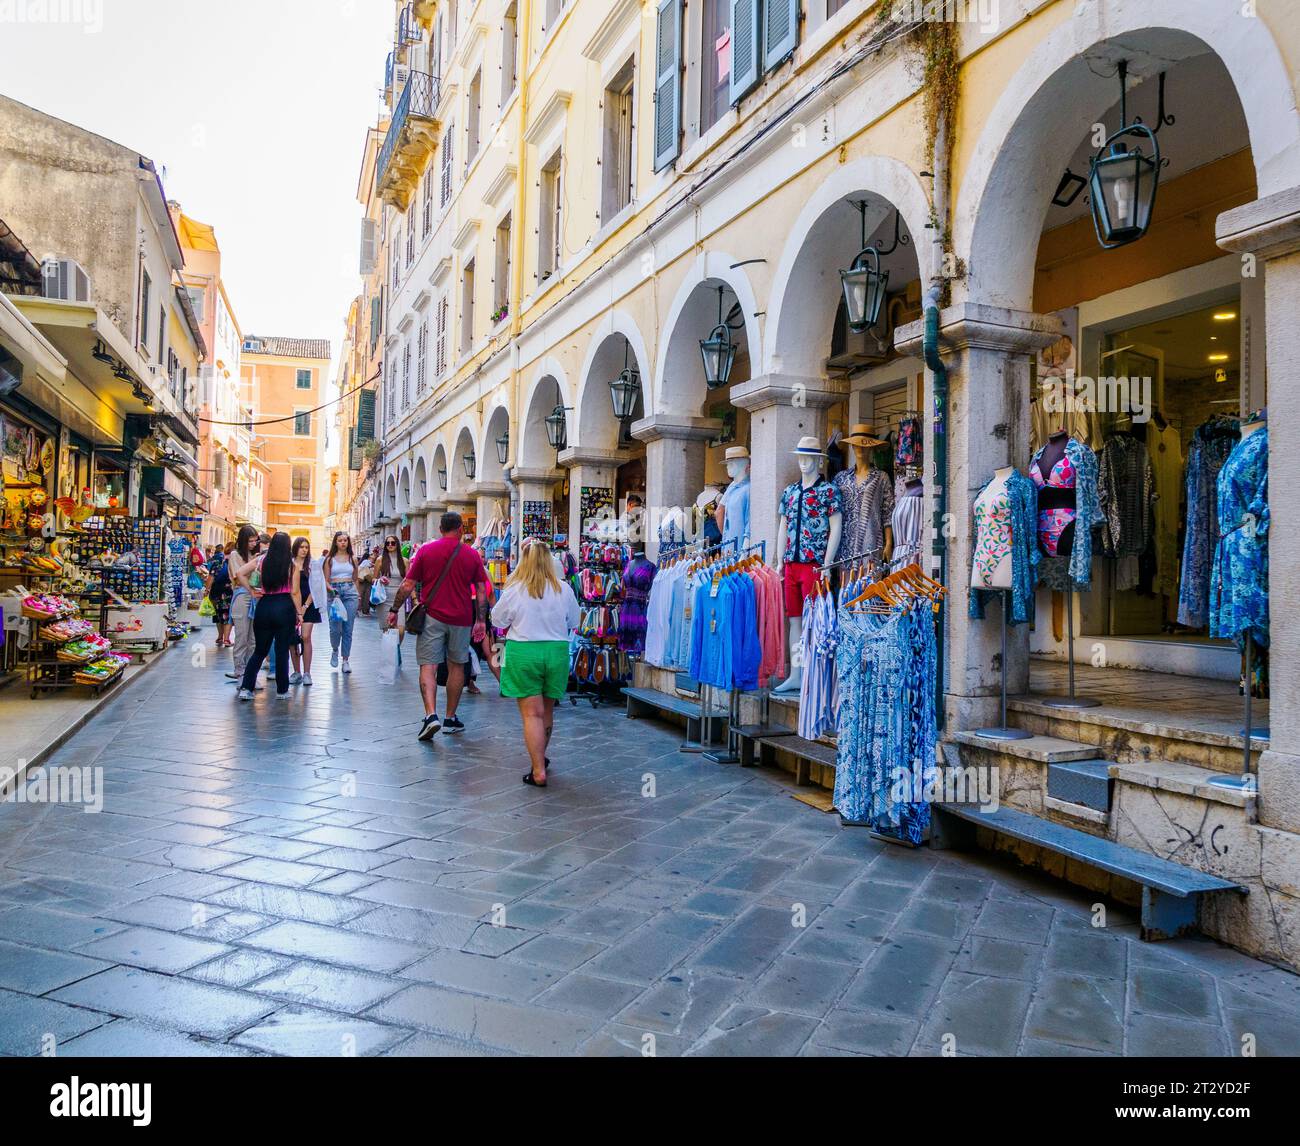 Streets of shops in the vibrant Byzantine town of Kerkira or Corfu Town capital of the island of Corfu in the Ionian Islands of Greece Stock Photo